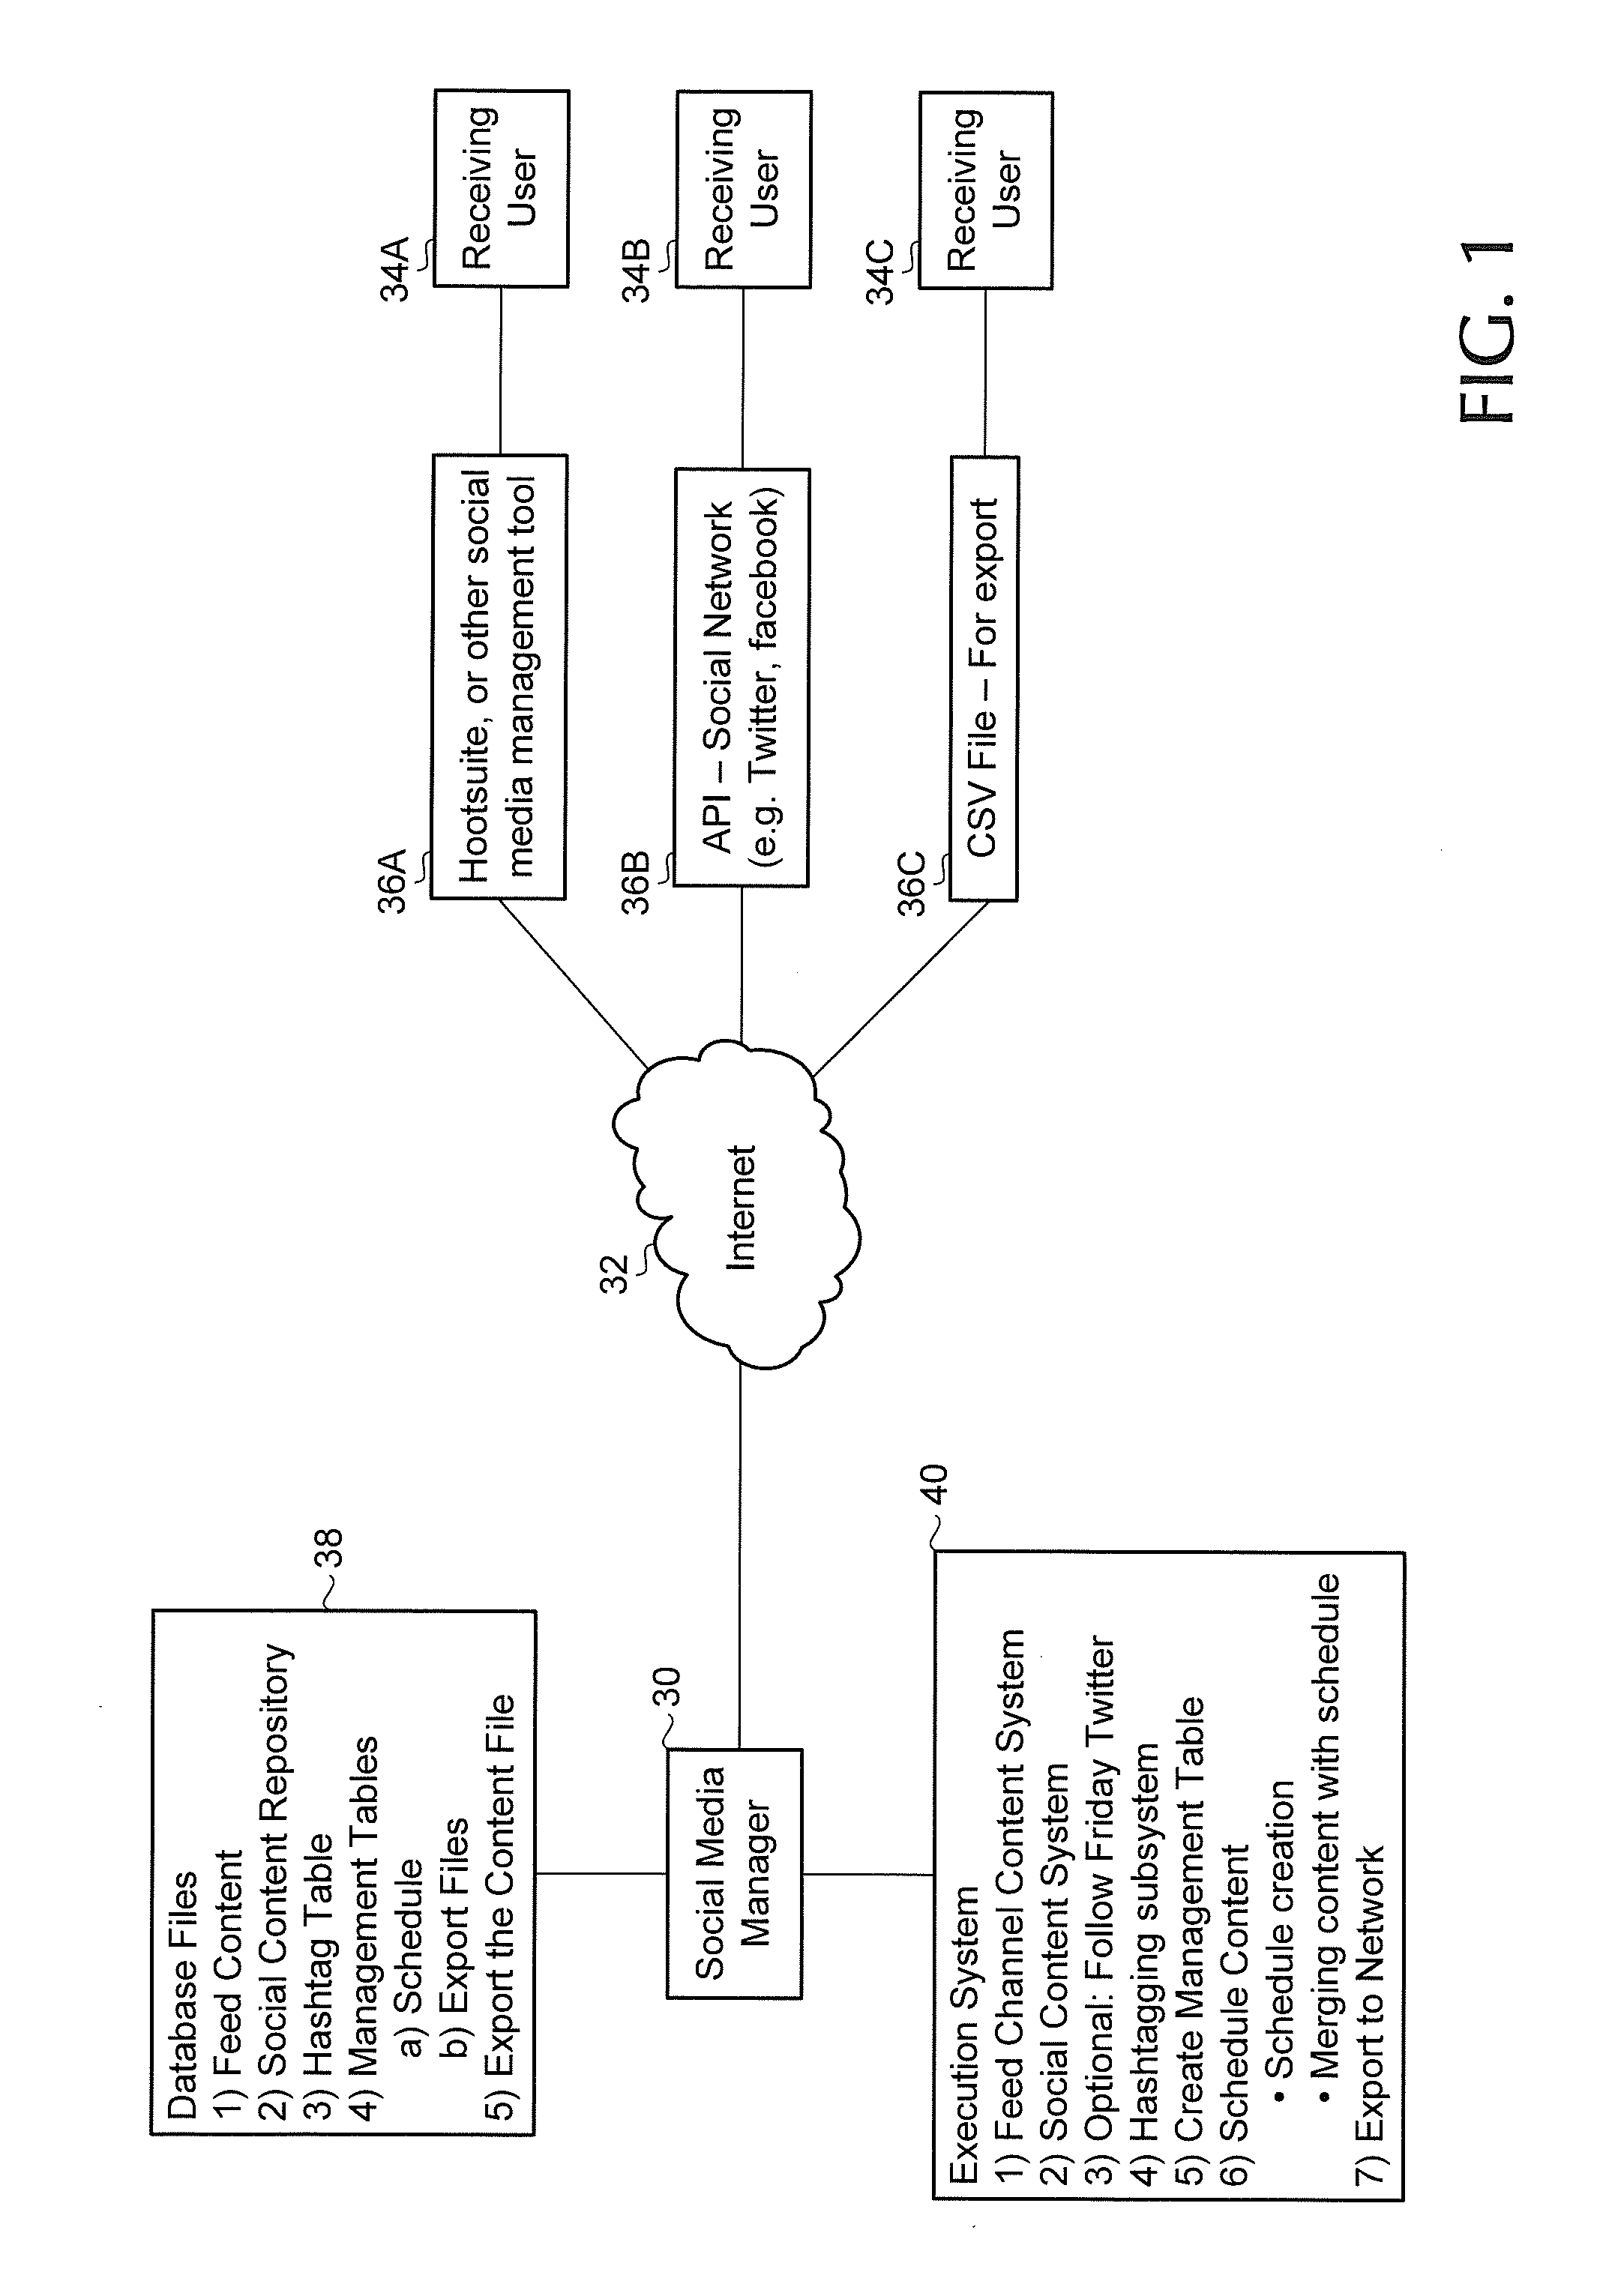 Social media content management system and method